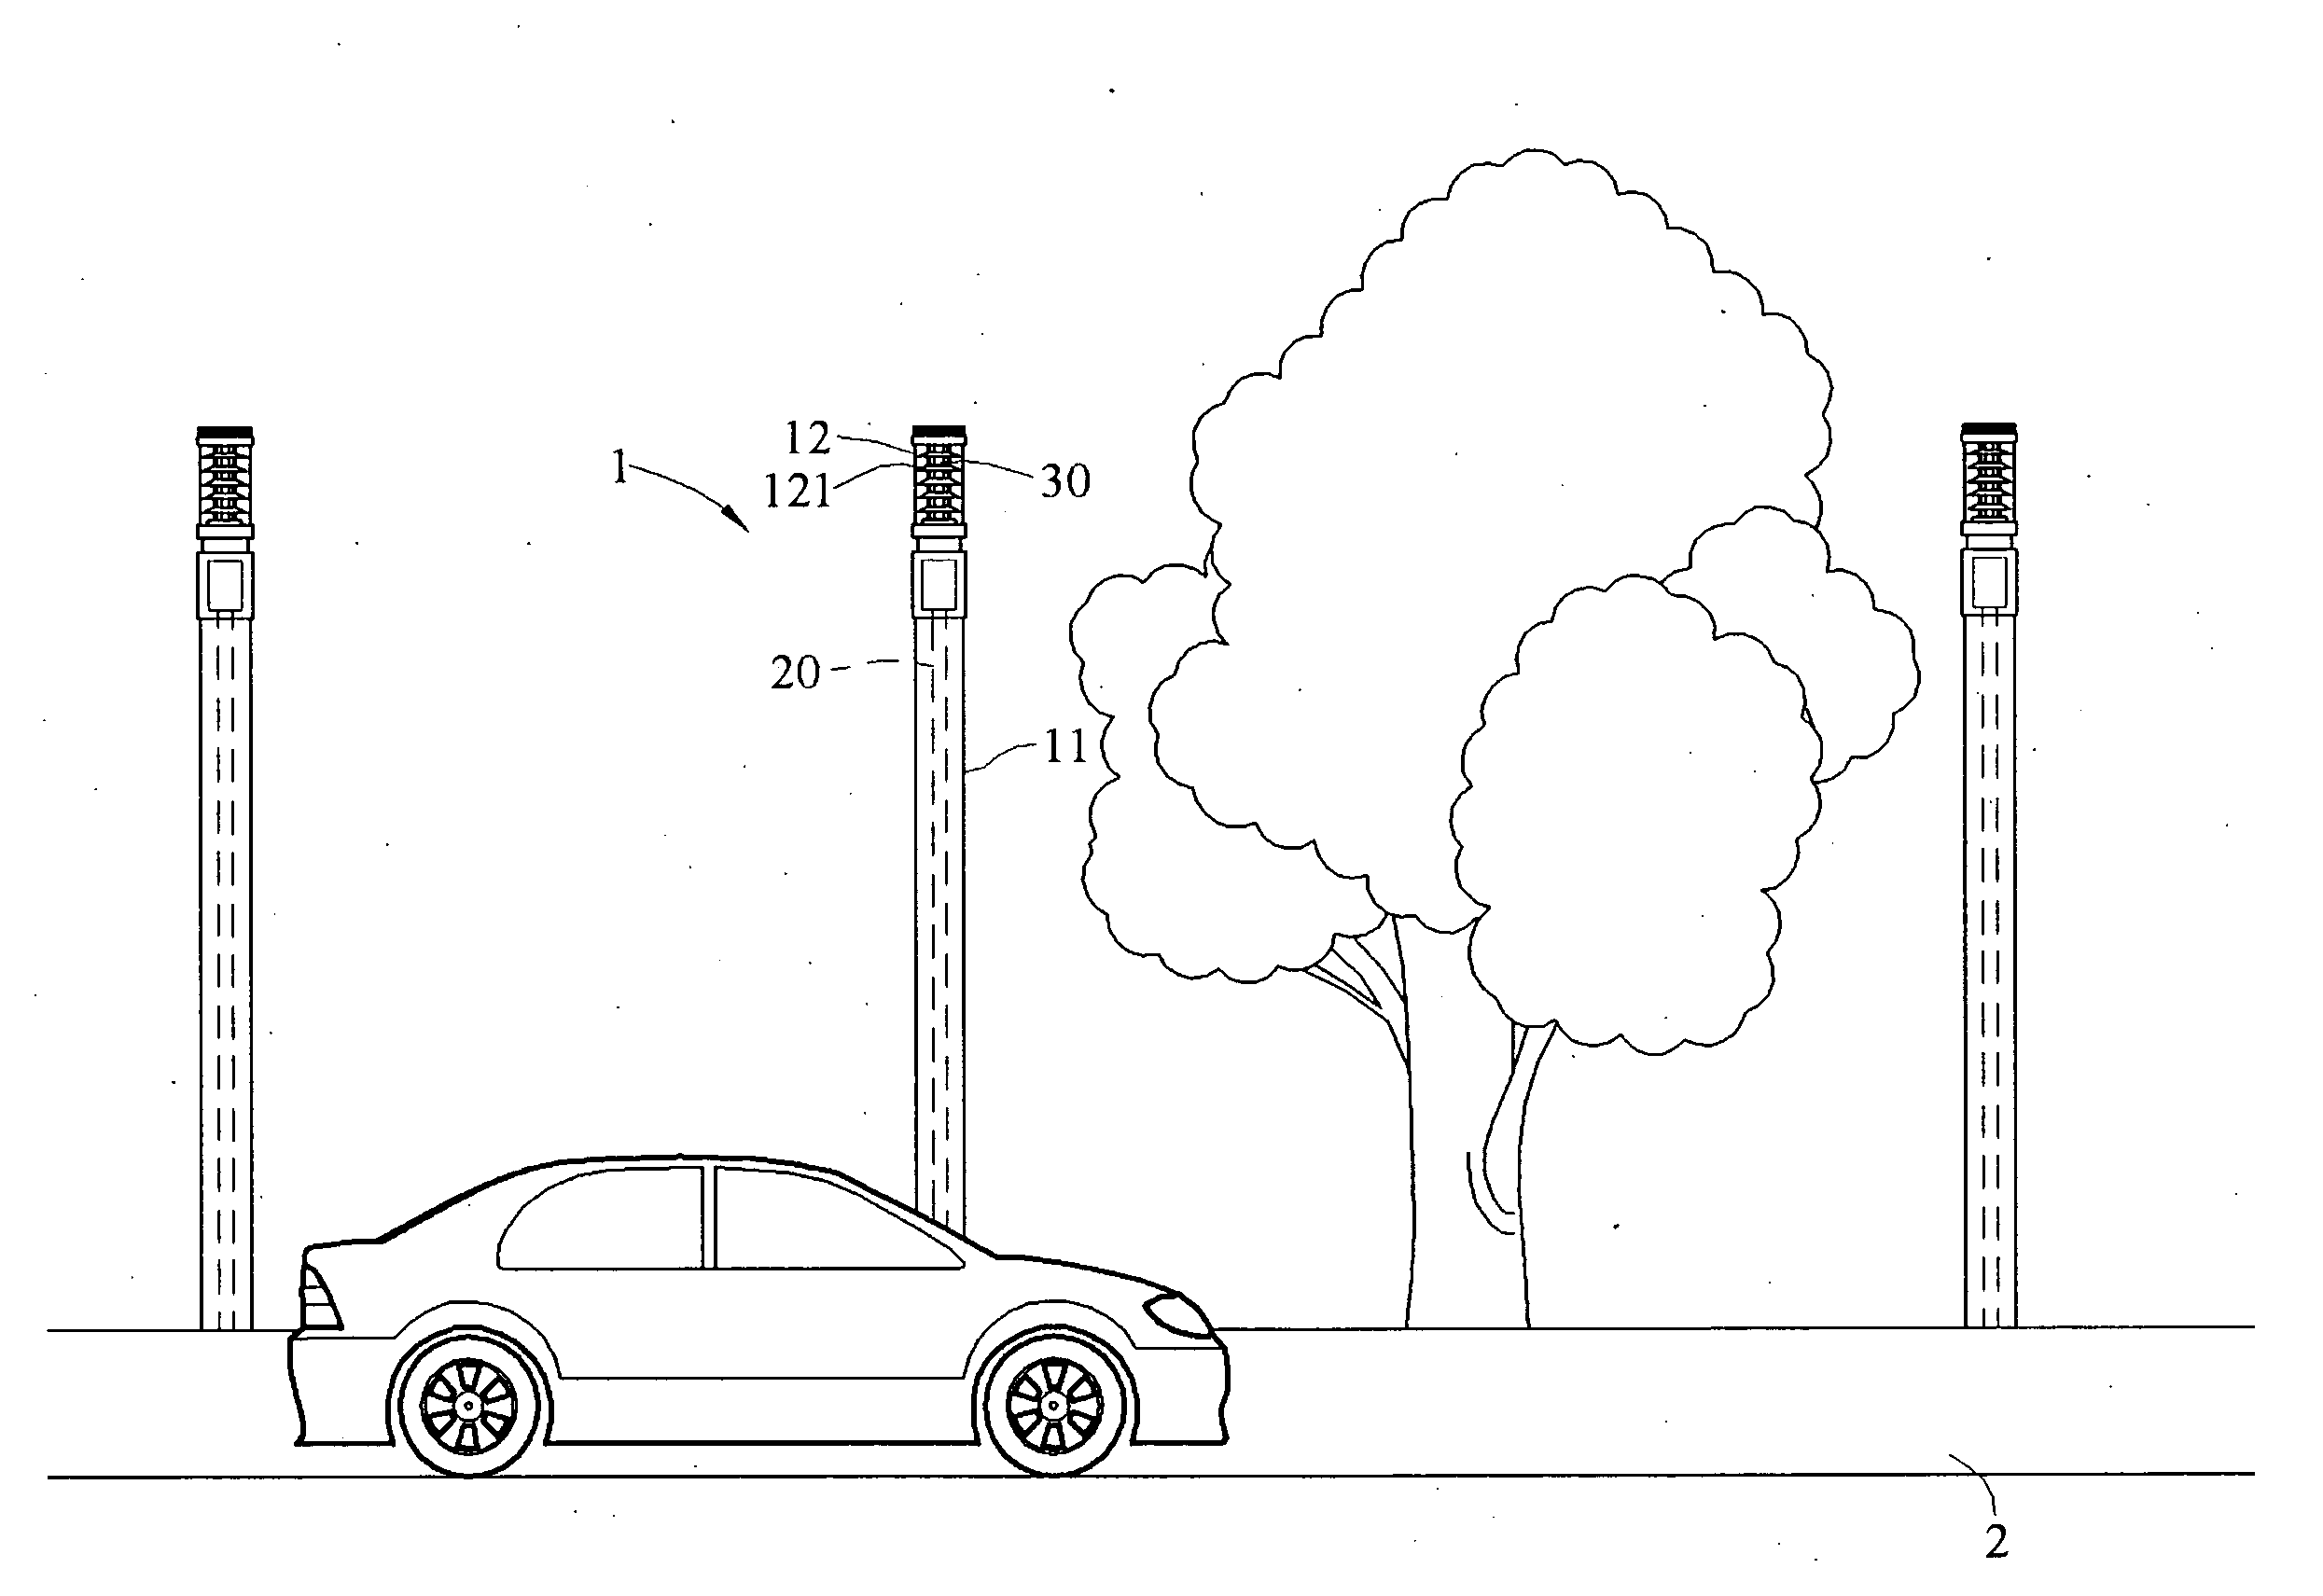 Antenna with lighting function